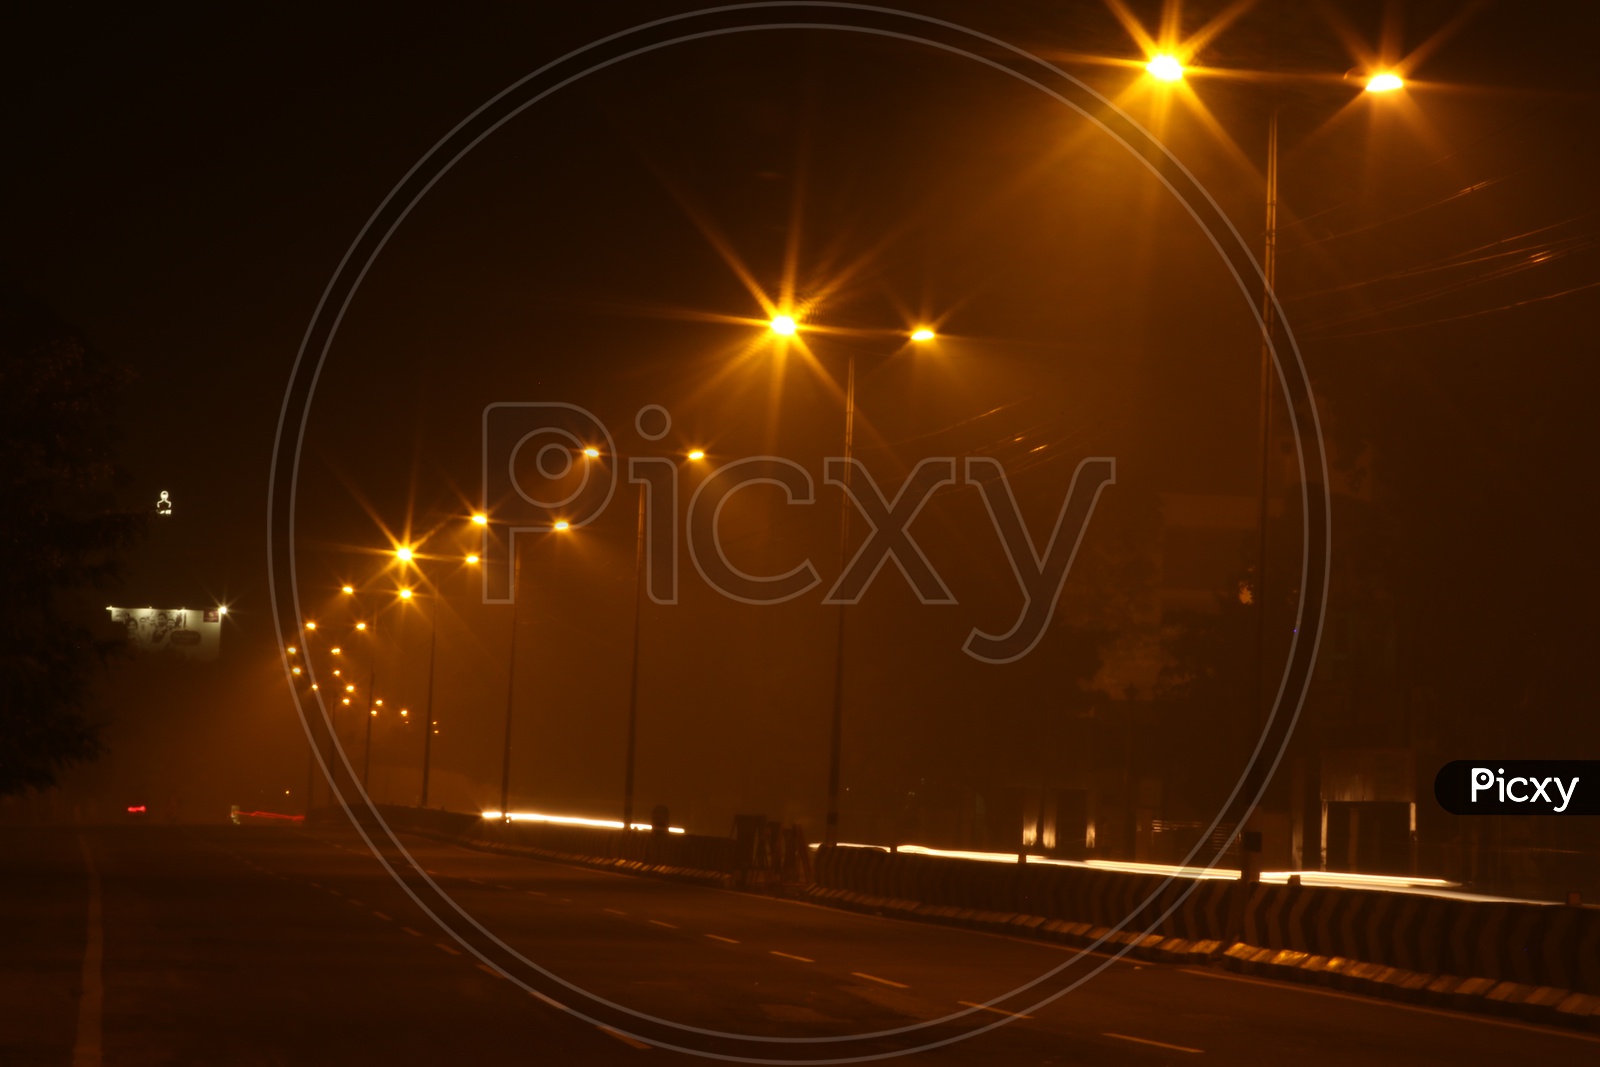 A Beautiful Long Exposure Shot Of a Highway Road With Lights In The Night Time and Vehicles Moving on the Road